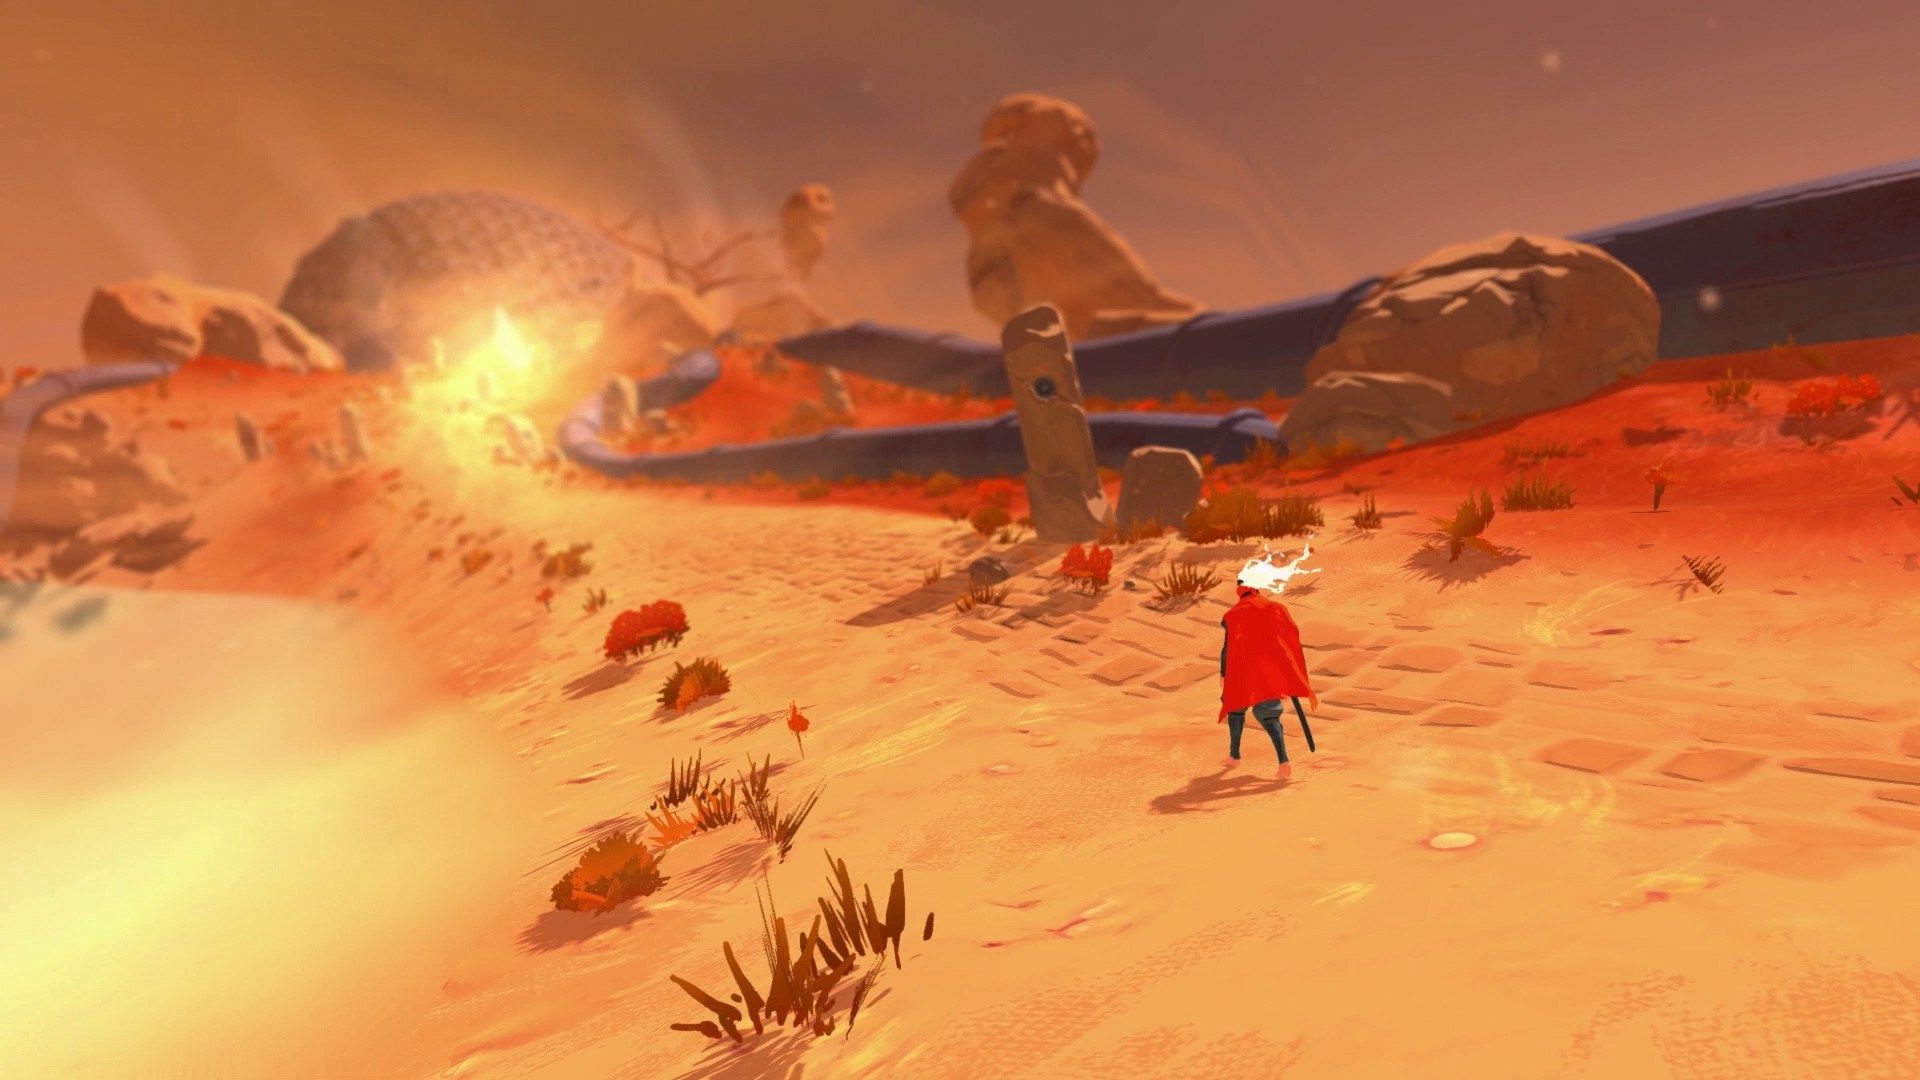 Furi Steam Key for PC - Buy now